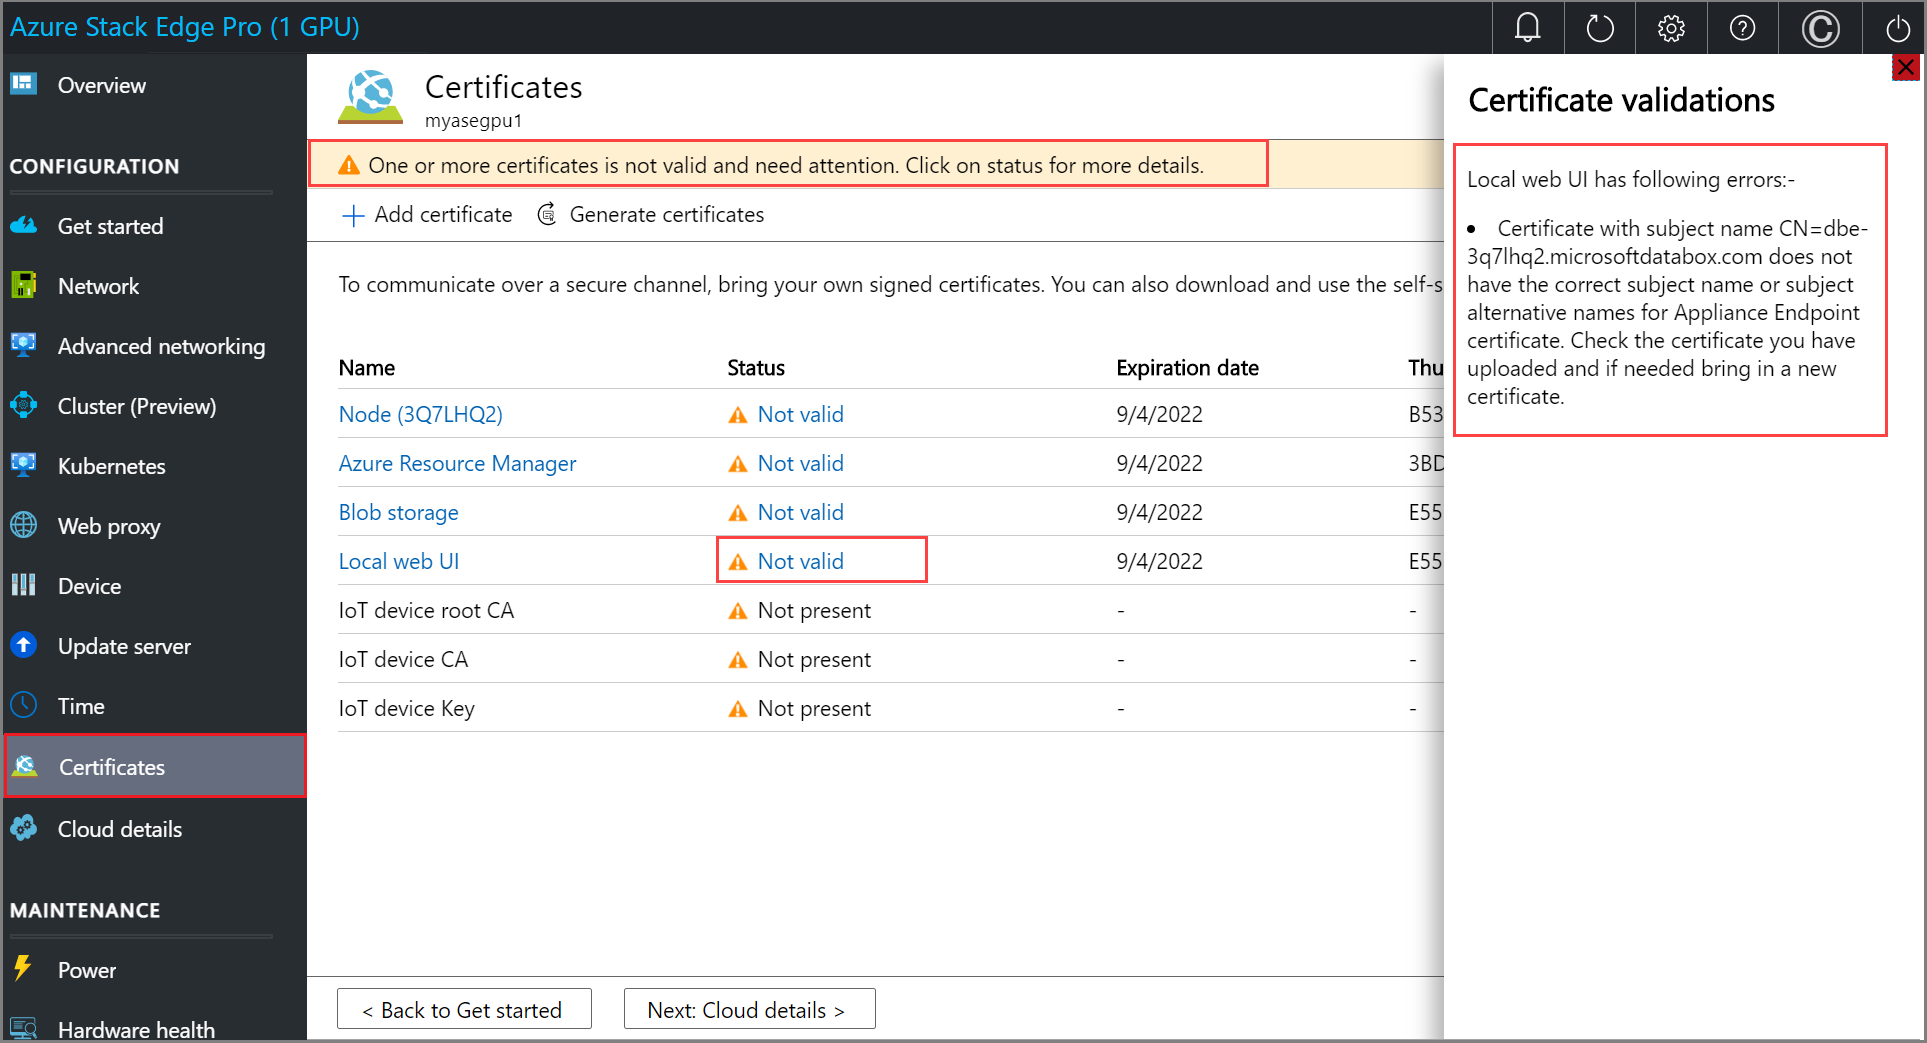 Screenshot of Certificate Details for a certificate on the Certificates page of an Azure Stack Edge device. The selected certificate and certificate details are highlighted.